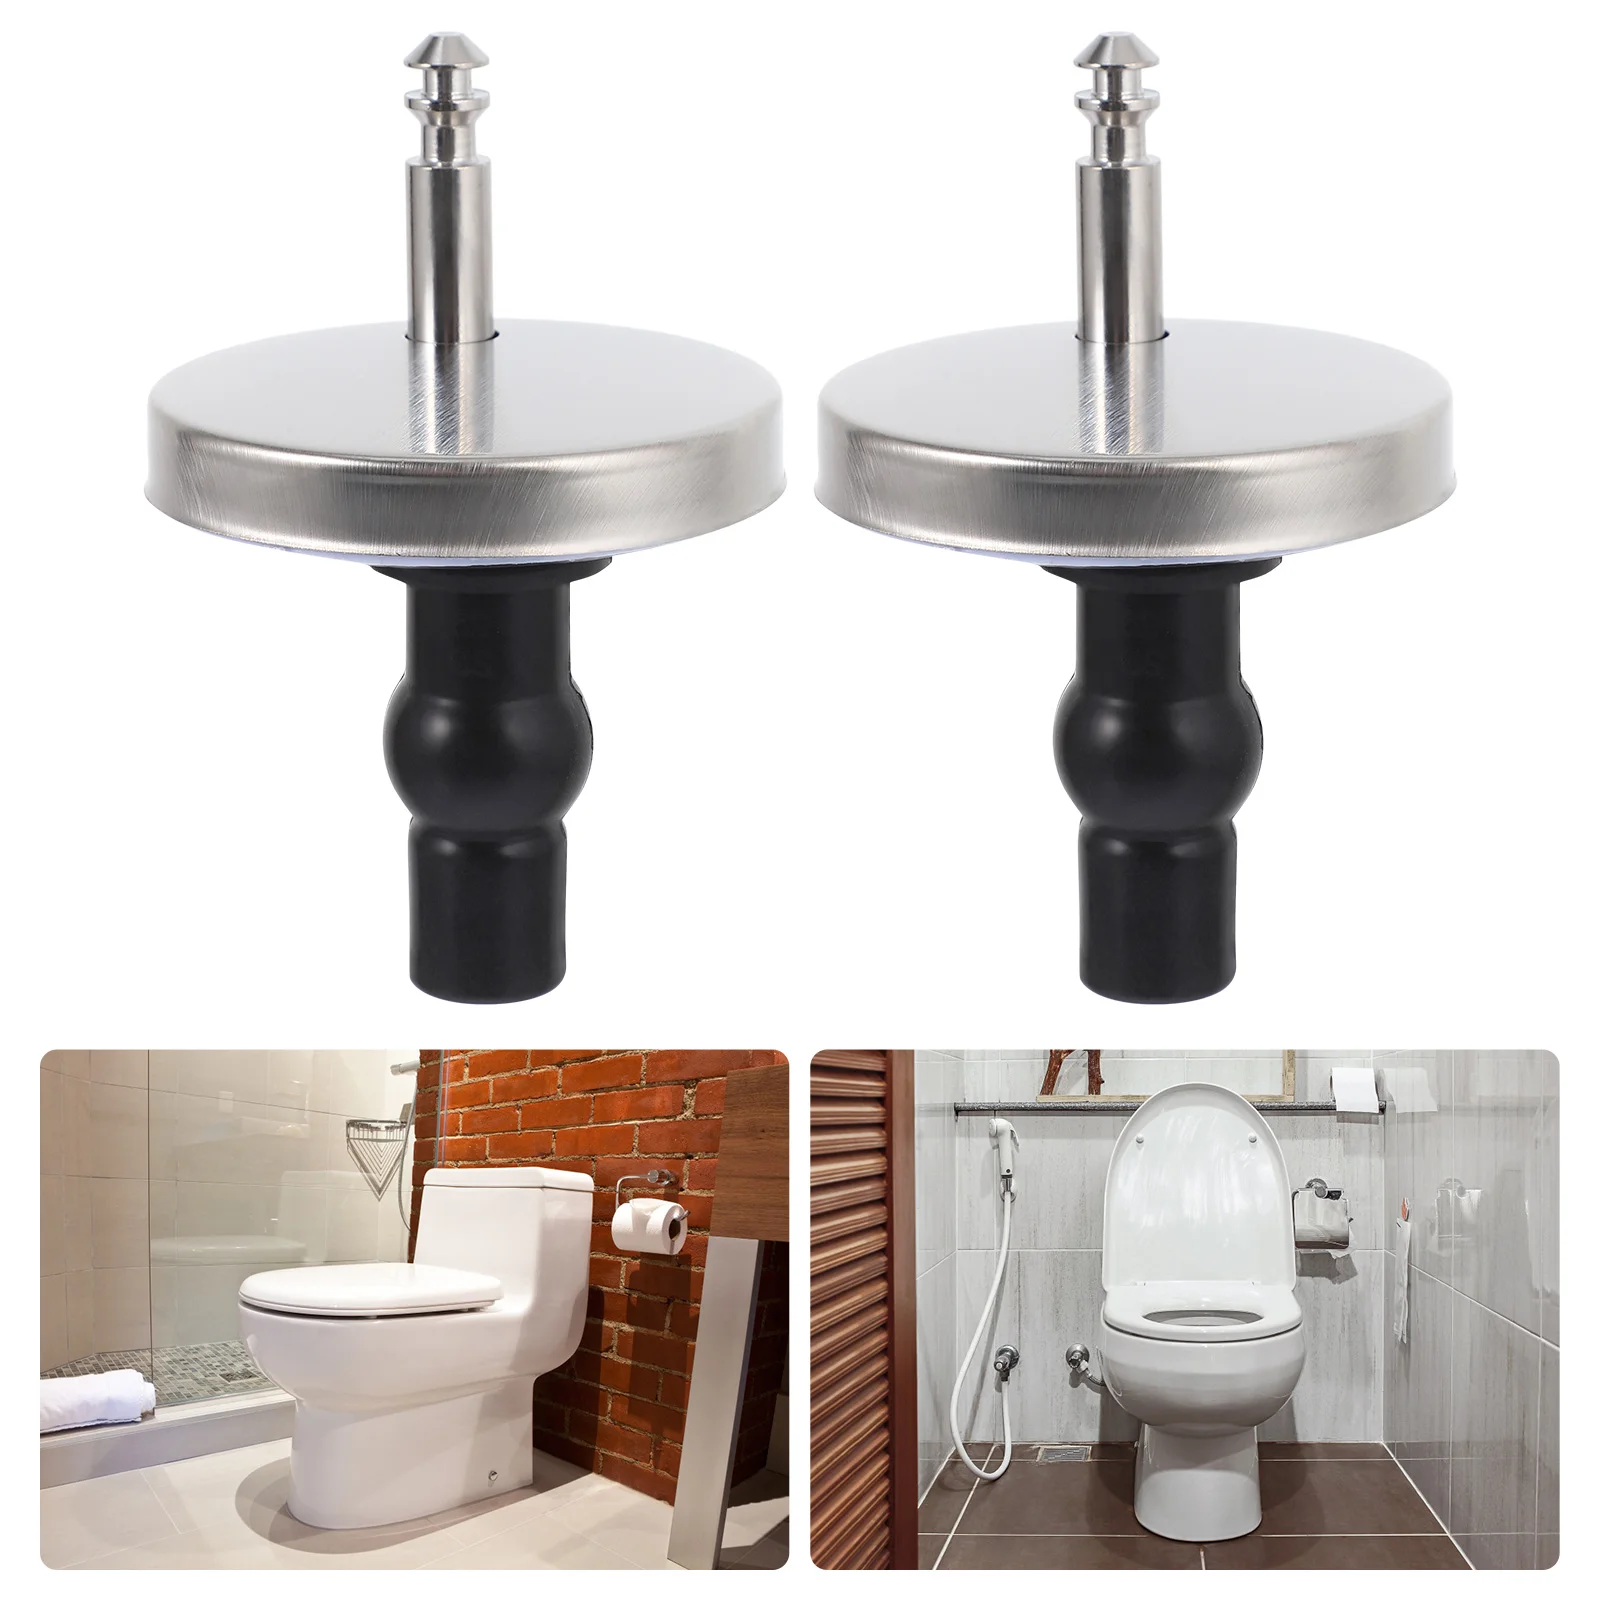 

Toilet Bolts Screws Screw Lid Hinges Seats Bolt Fixing Replacement Hinge Parts Round Toilets Standardfixed Mounting Elongated